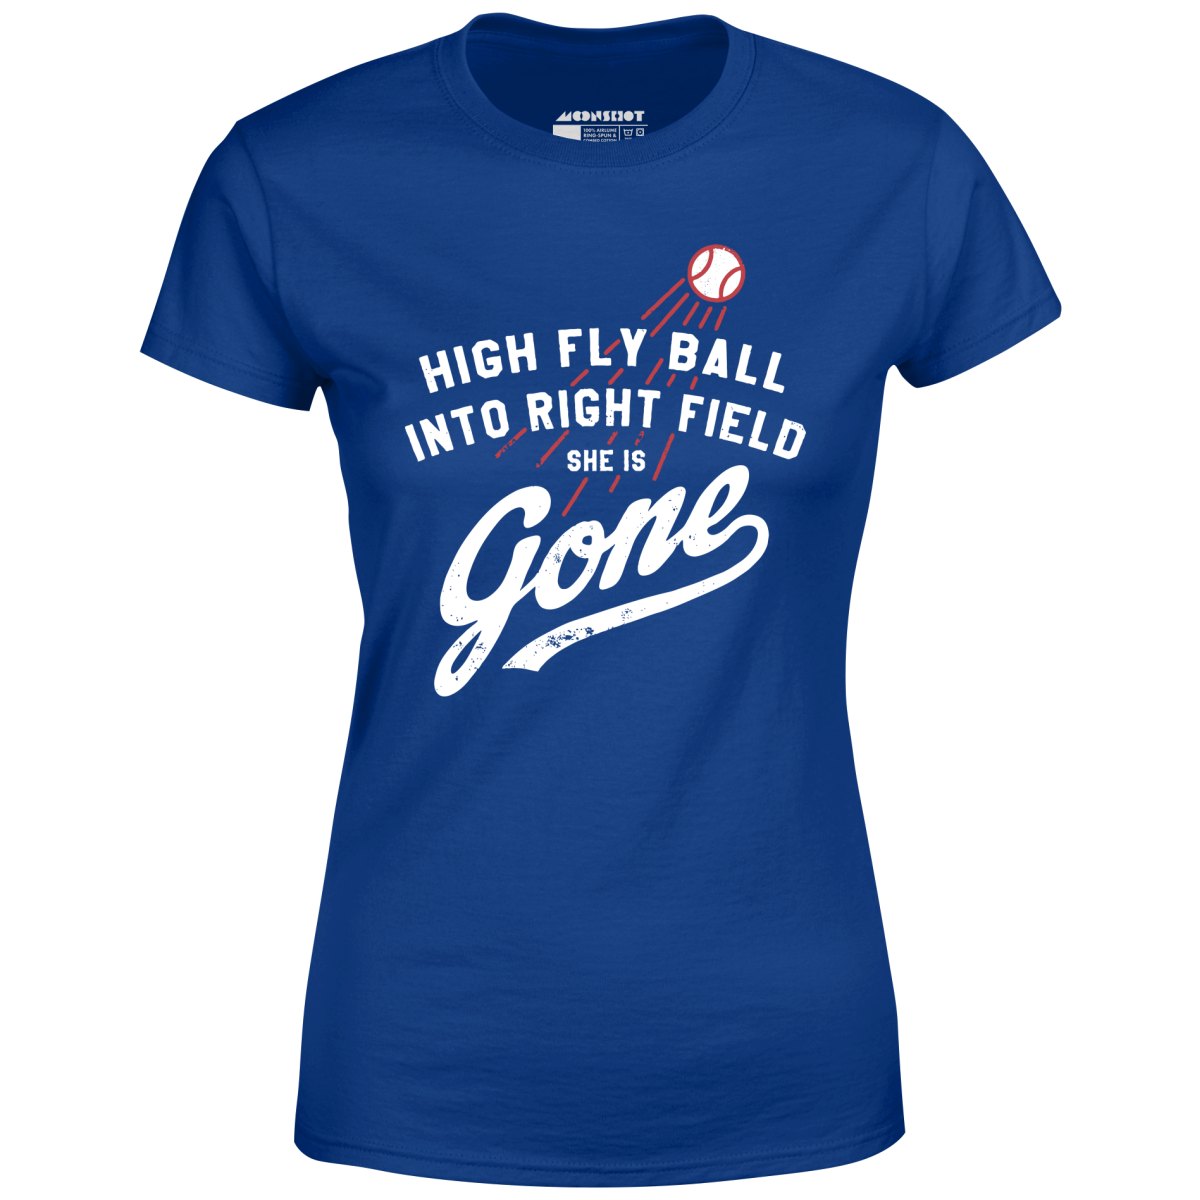 High Fly Ball Into Right Field She is Gone - Women's T-Shirt